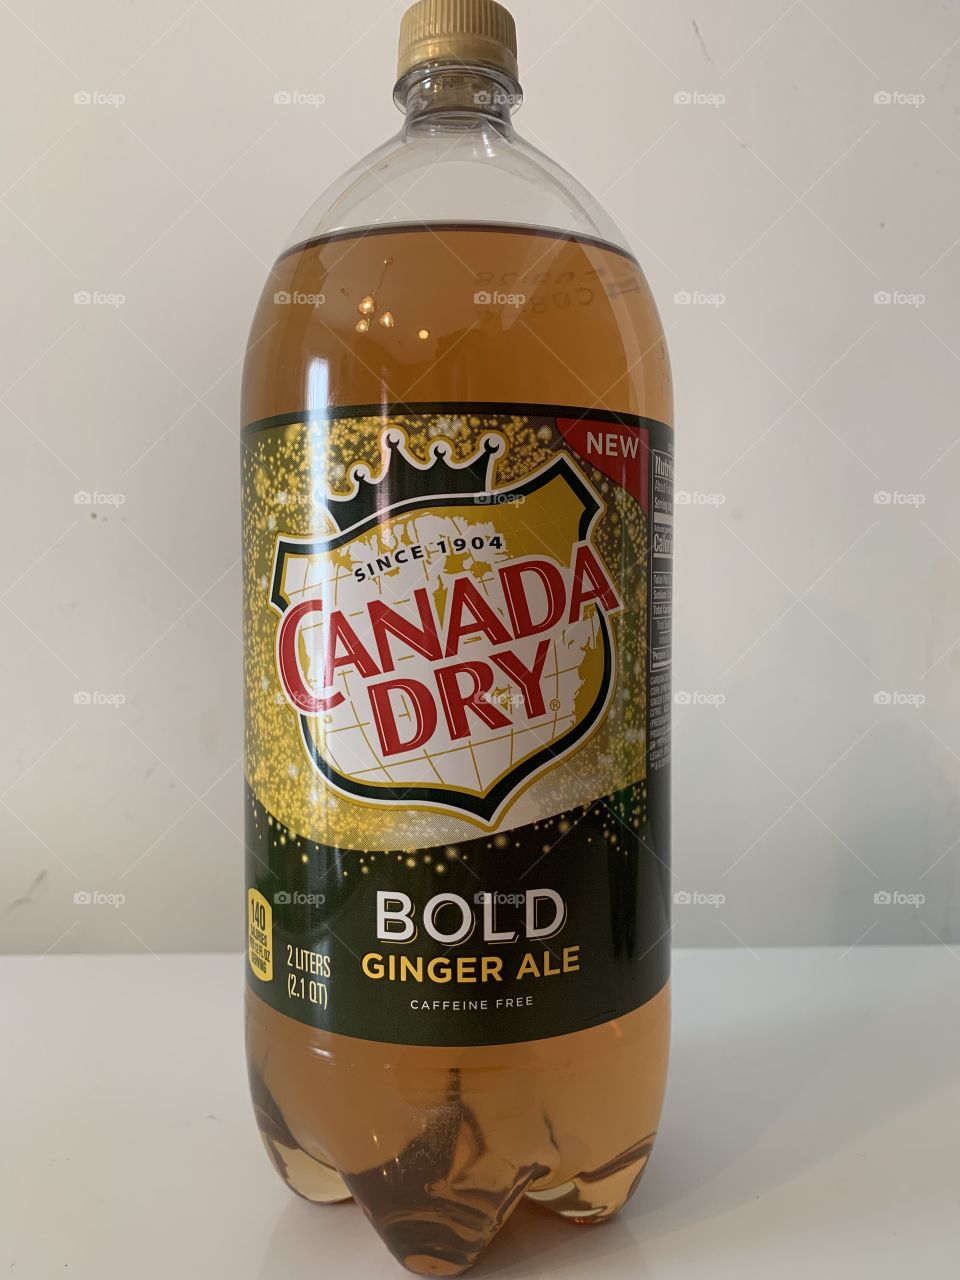 COME TASTE CANADA DRY GINGER ALE BOLD! 